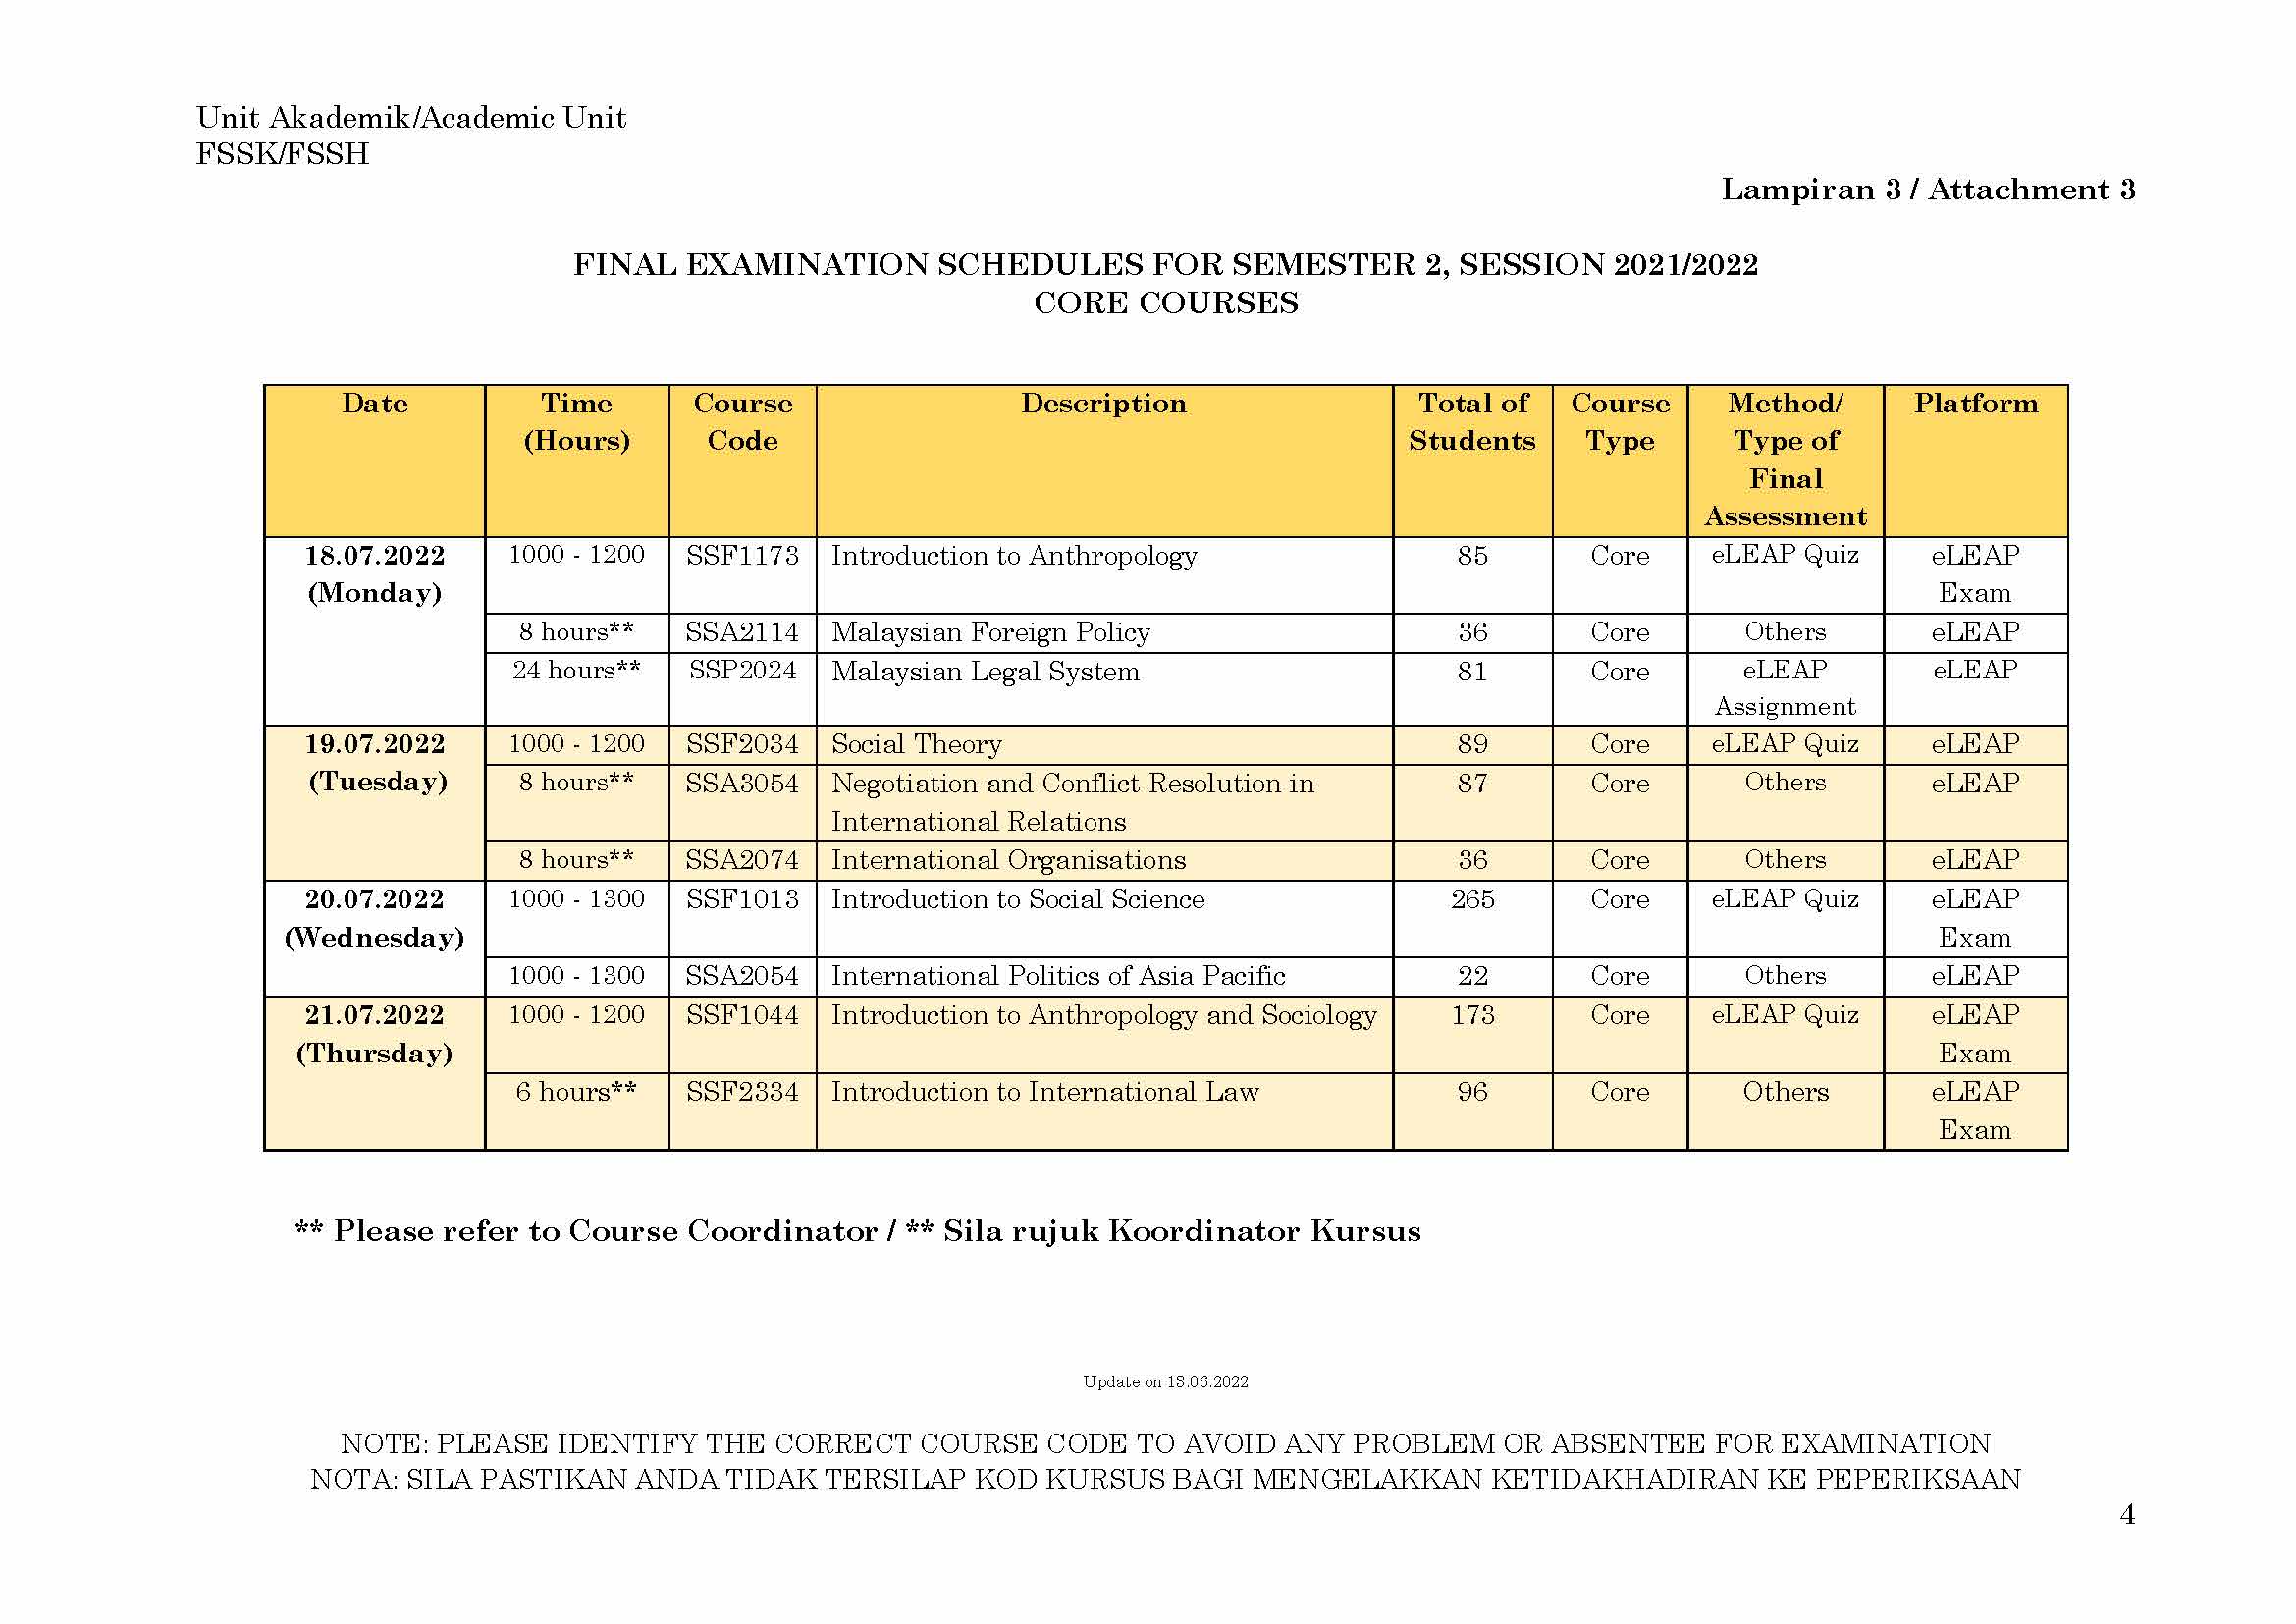 FINAL EXAMINATION SCHEDULES FOR SEMESTER 2 SESSION 2021 2022 Page 5